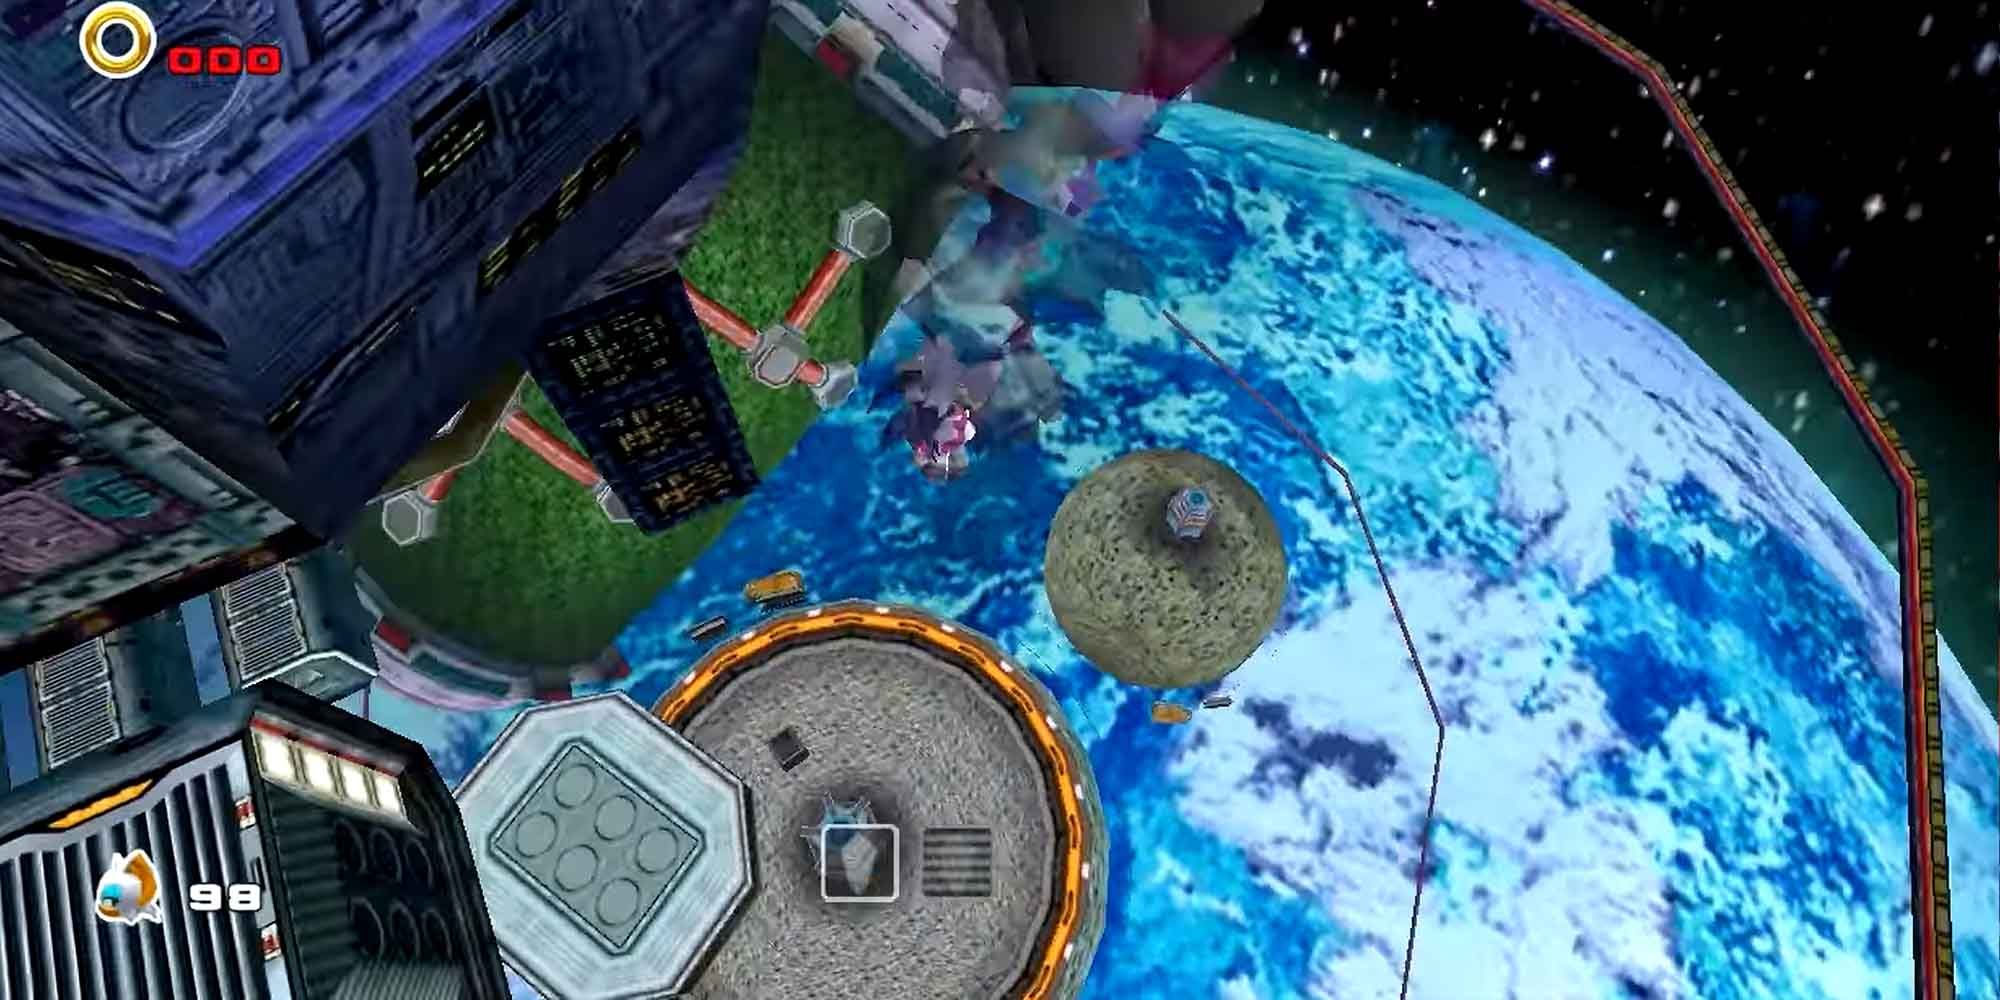 The Mad Space level in Sonic Adventure 2